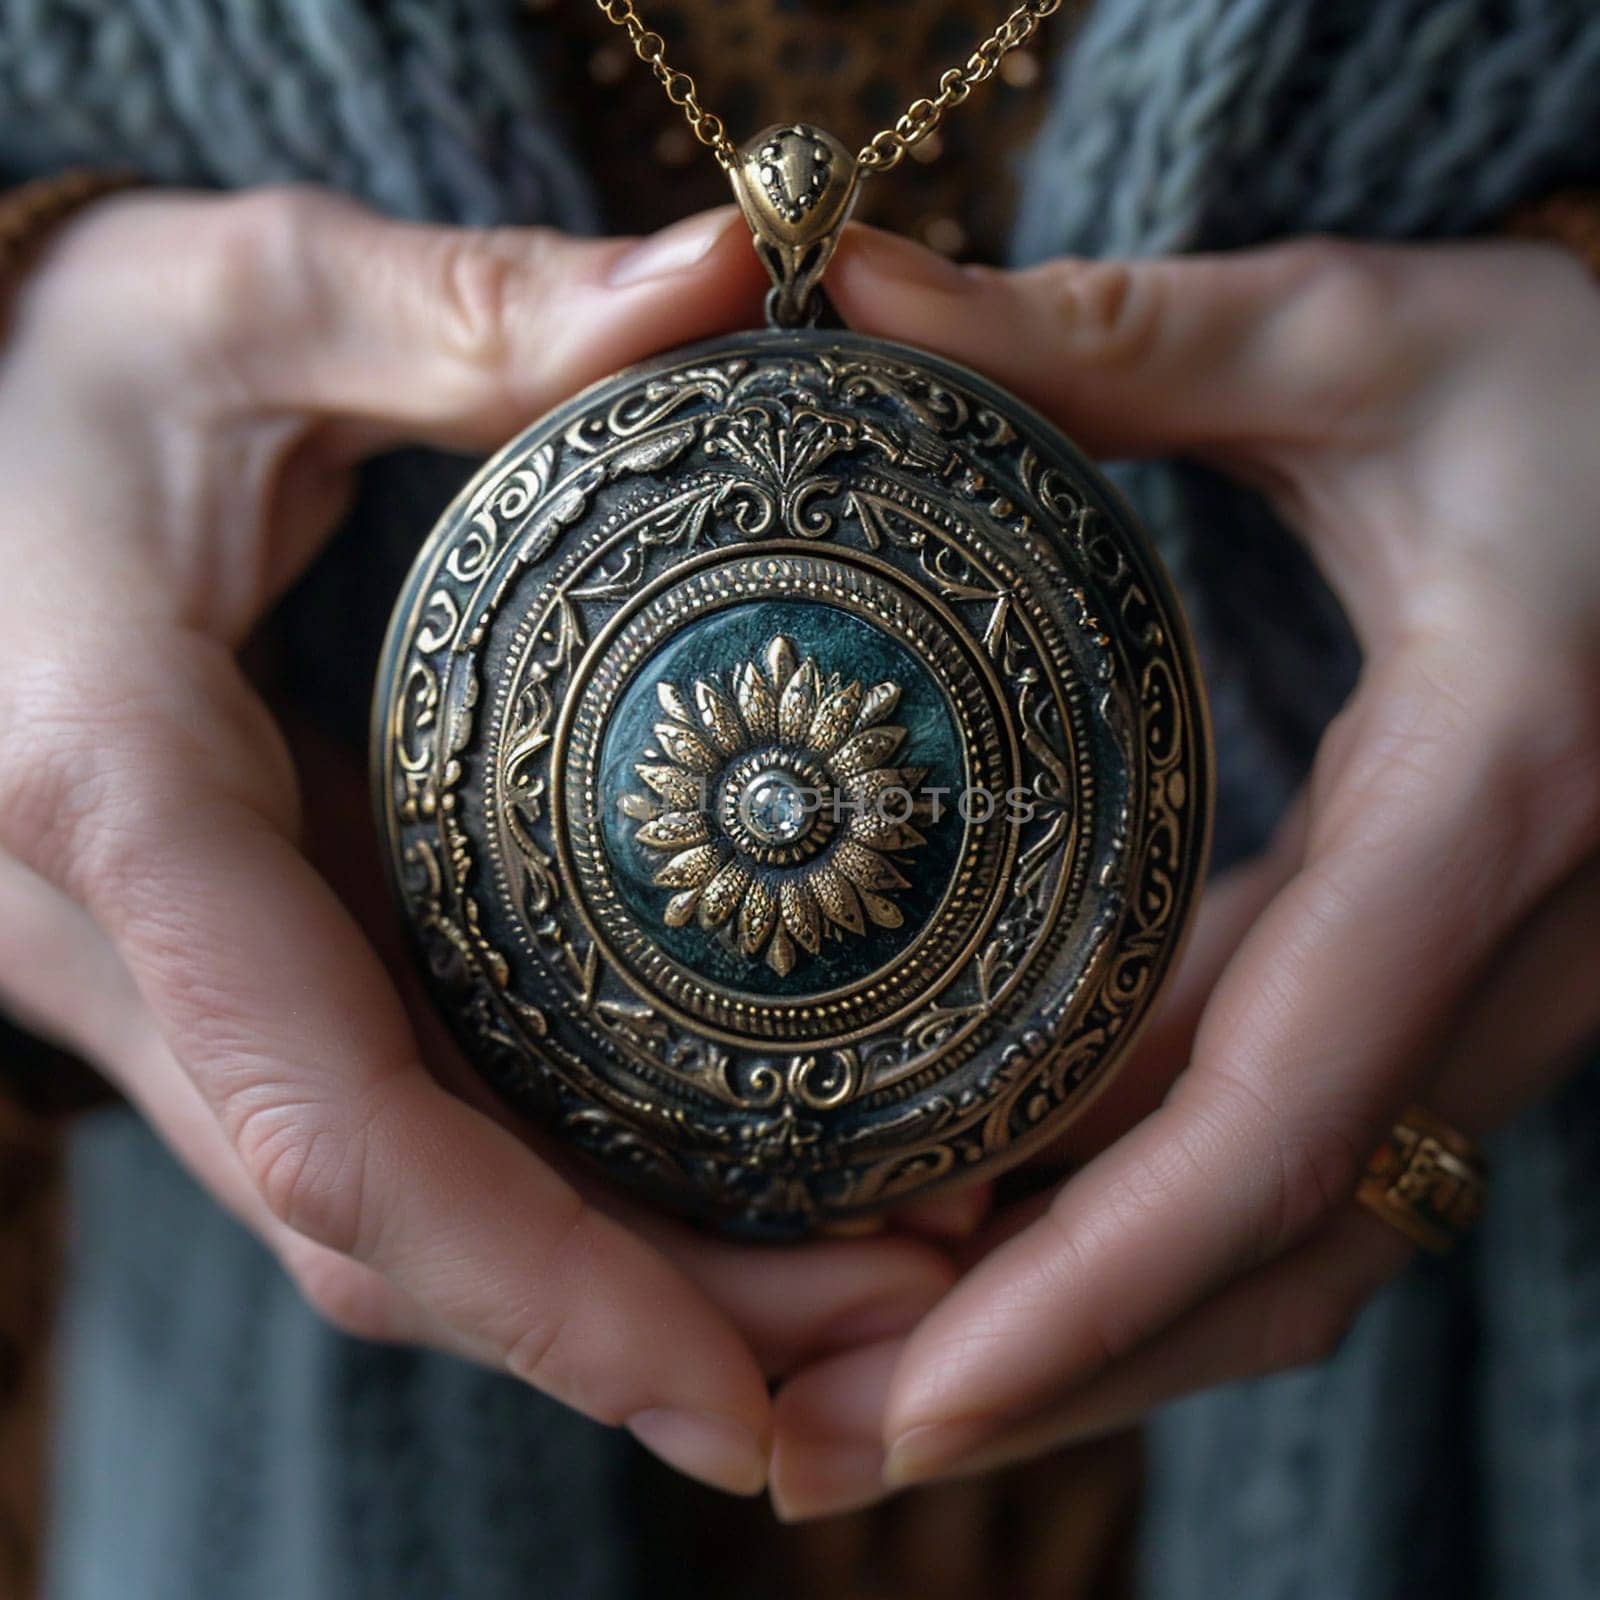 Fingers clutching a locket evoking personal history by Benzoix